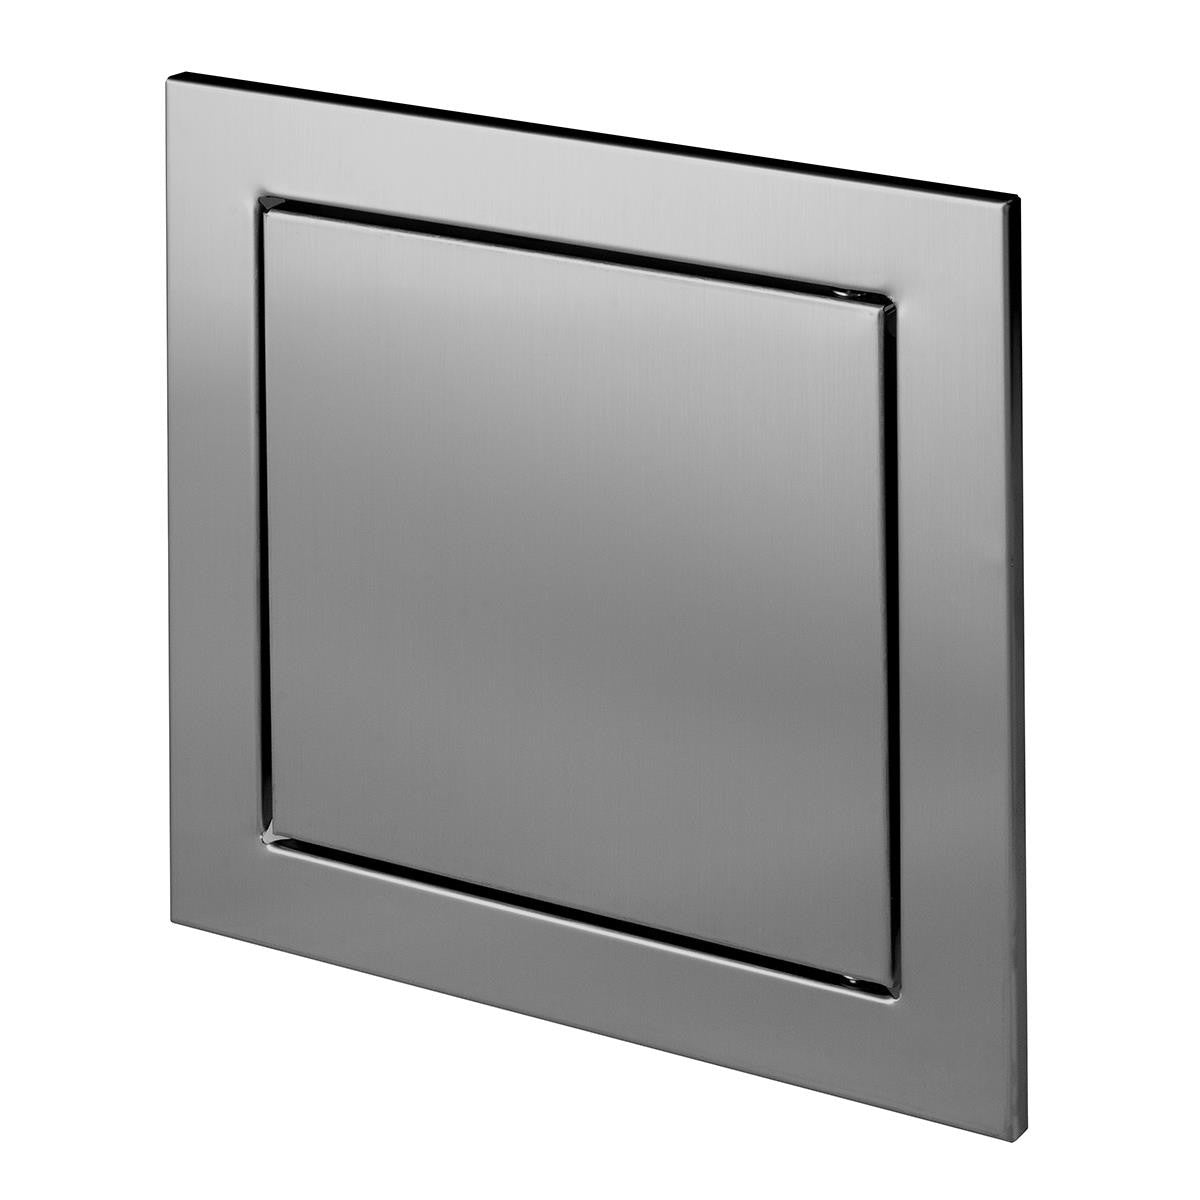 Access Panel Stainless Steel Inspection Door Revision